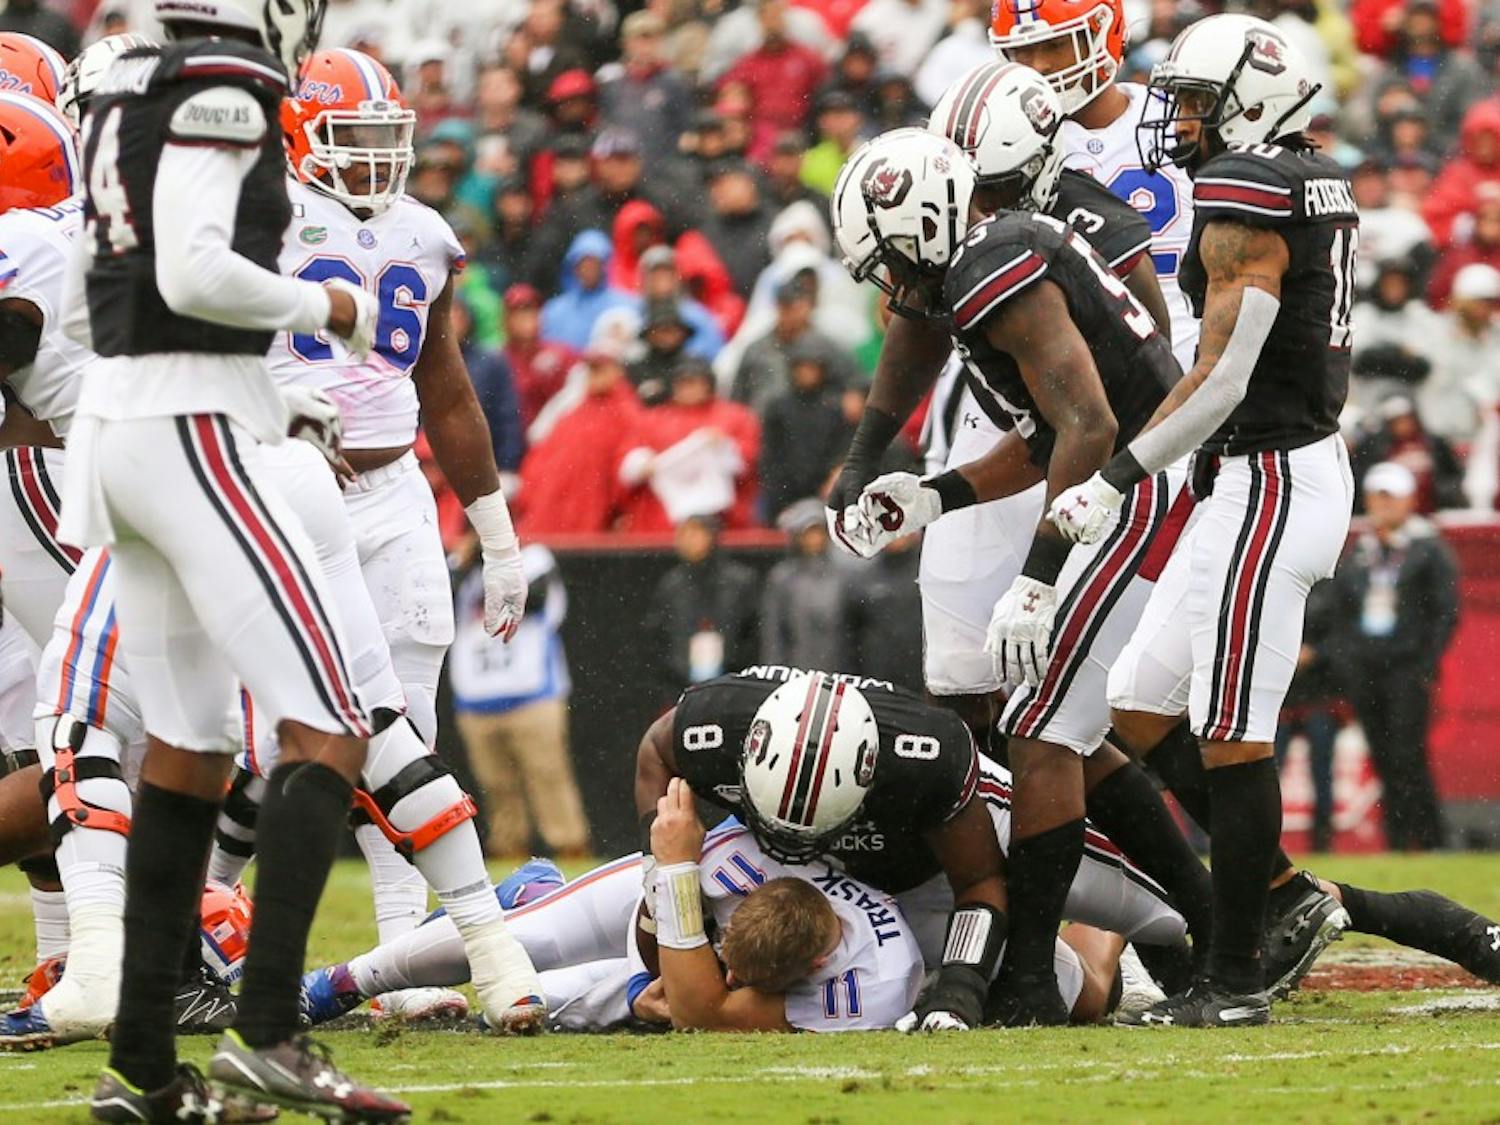 Senior defensive lineman D.J. Wonnum takes down a Florida player with the ball during the game.